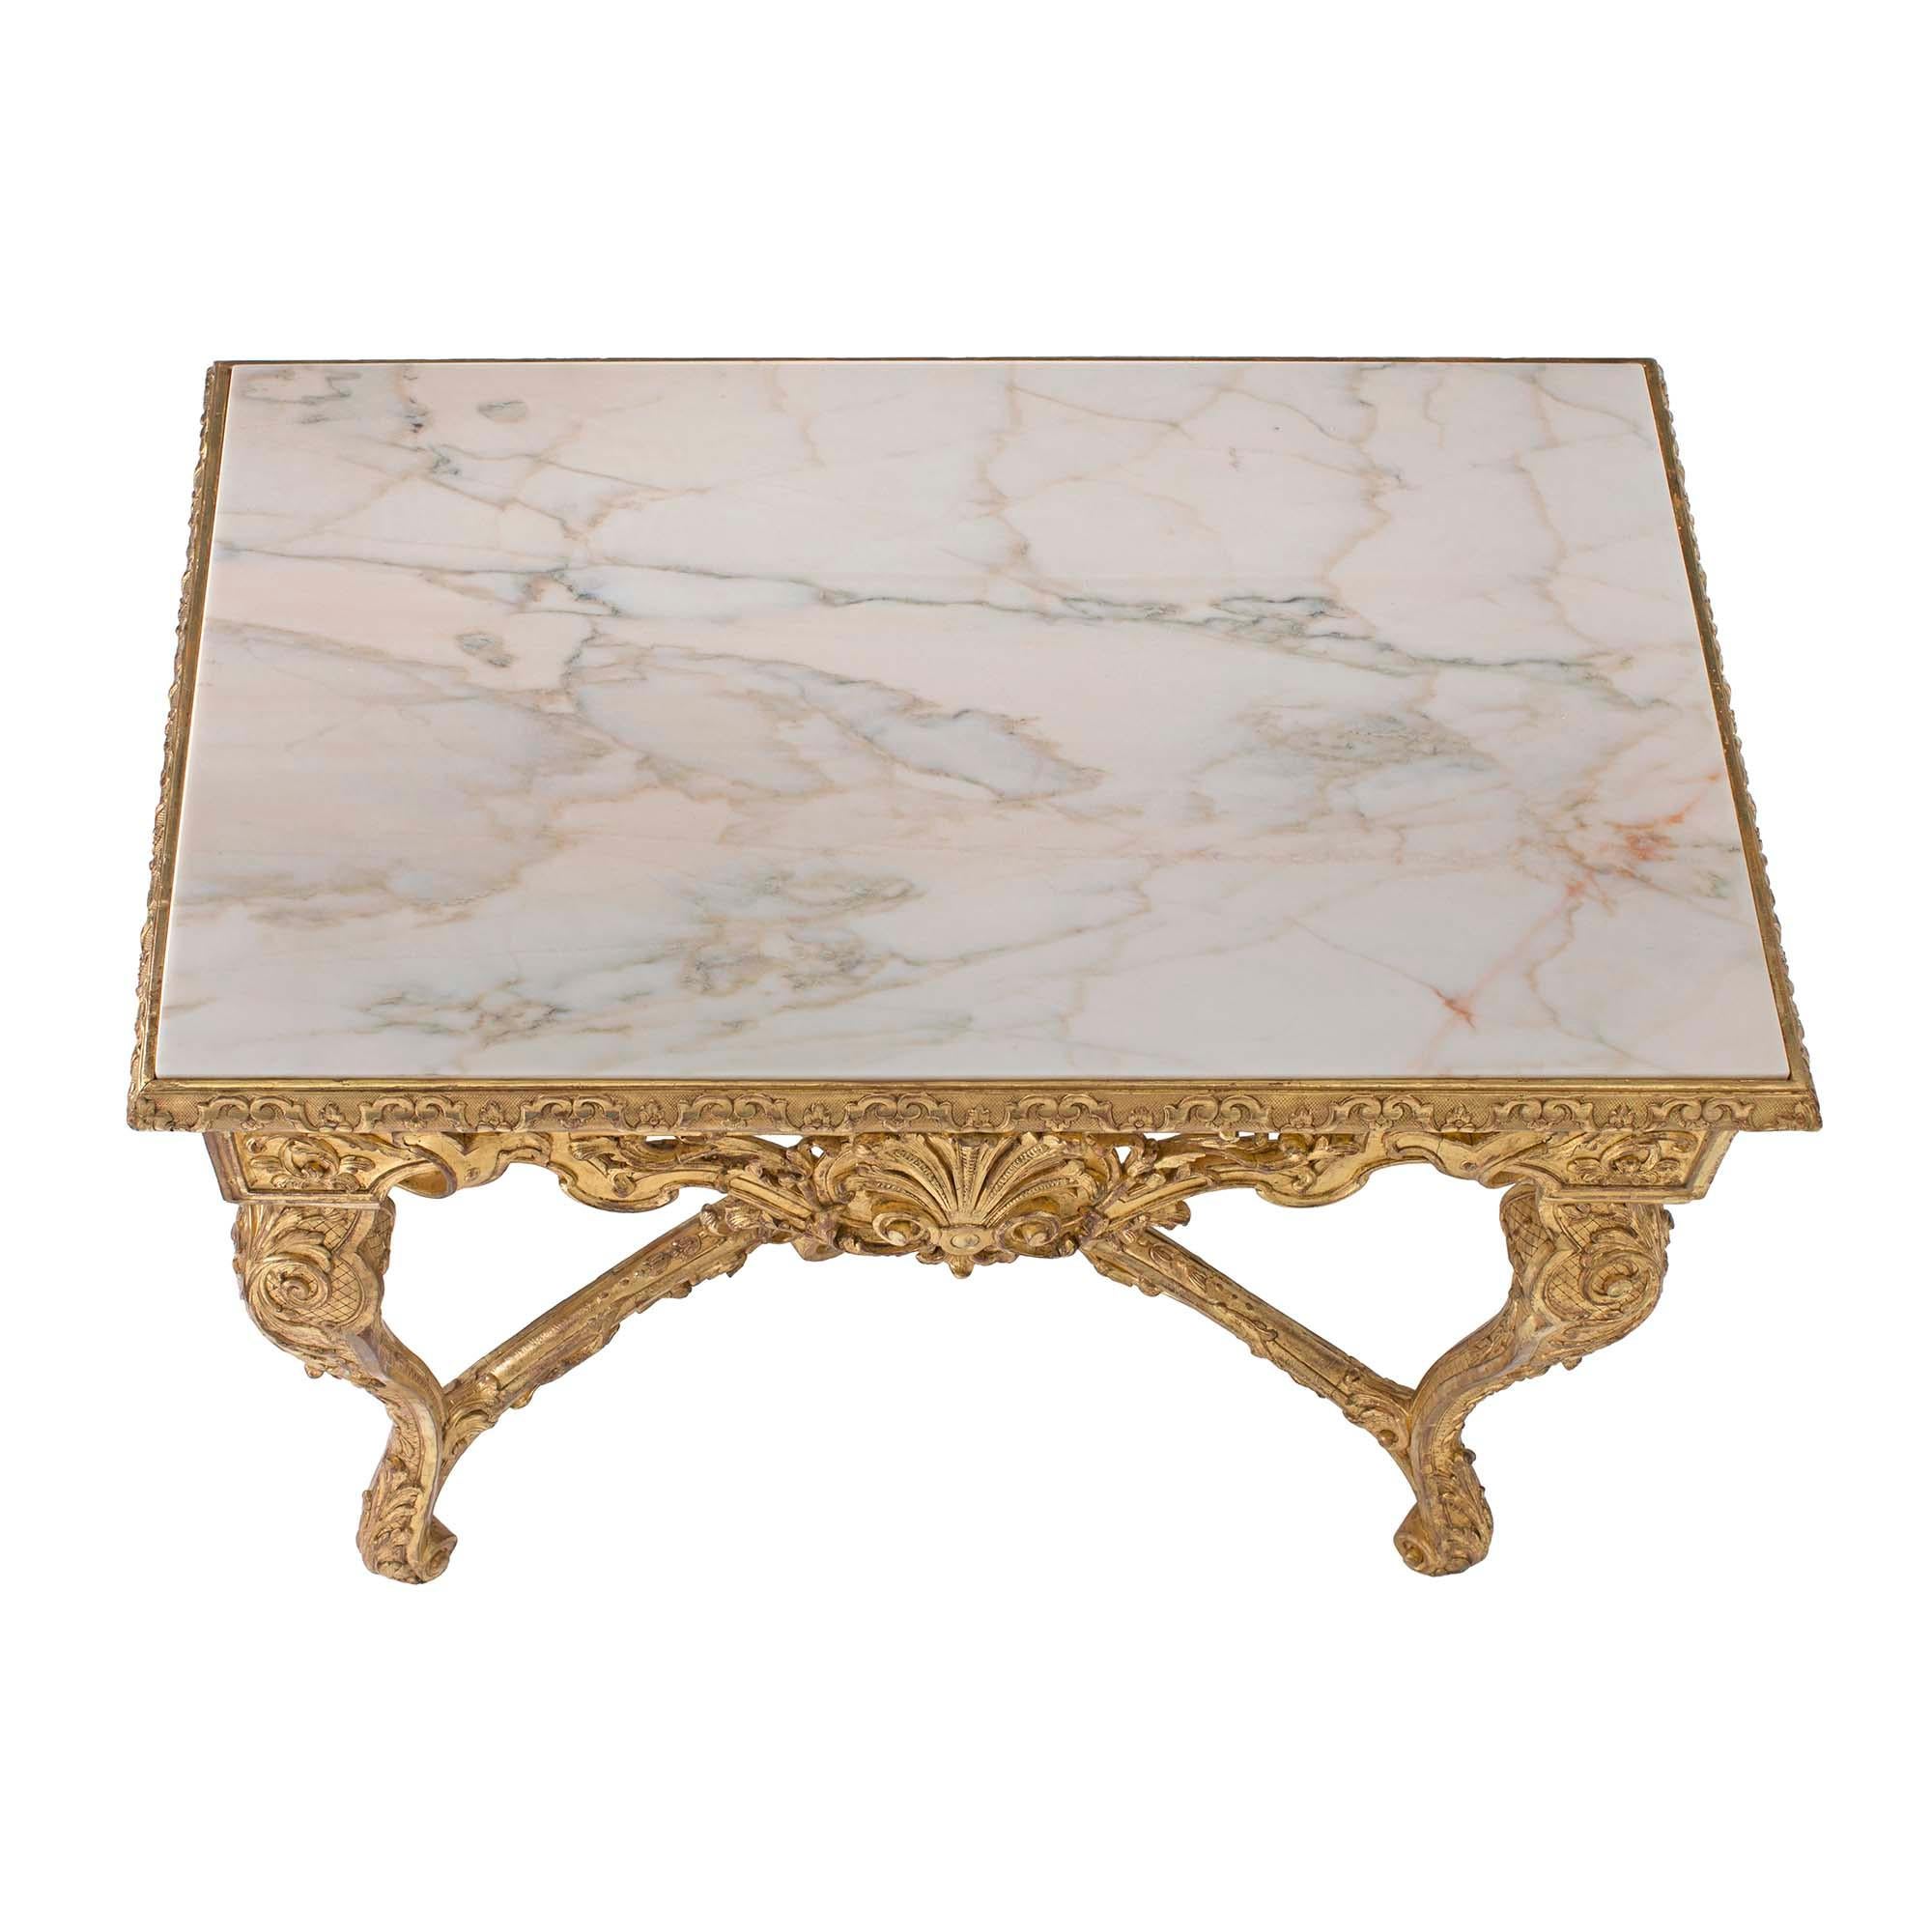 A beautiful French 19th-century Regence st. giltwood console with marble top. The console is raised on lovely cabriole legs adorned with large scrolls and opulent foliate details. The legs are joined by an X-shaped stretcher centered with a rosette